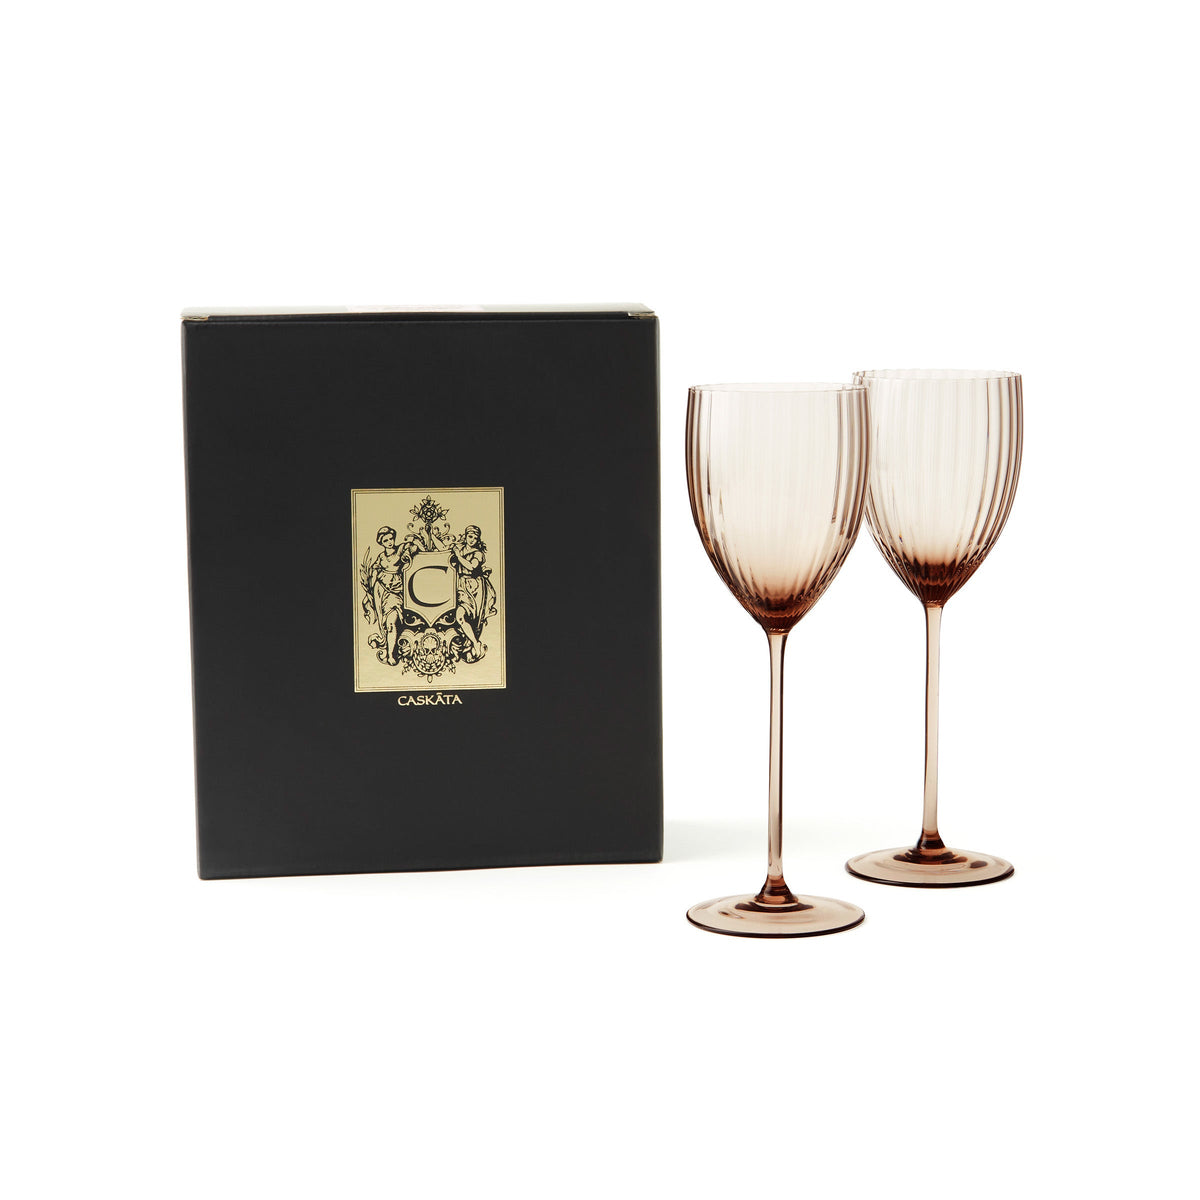 Quinn Mocha White Wine Crystal Stemware Set of 2 glasses with gold and black gift box from Caskata